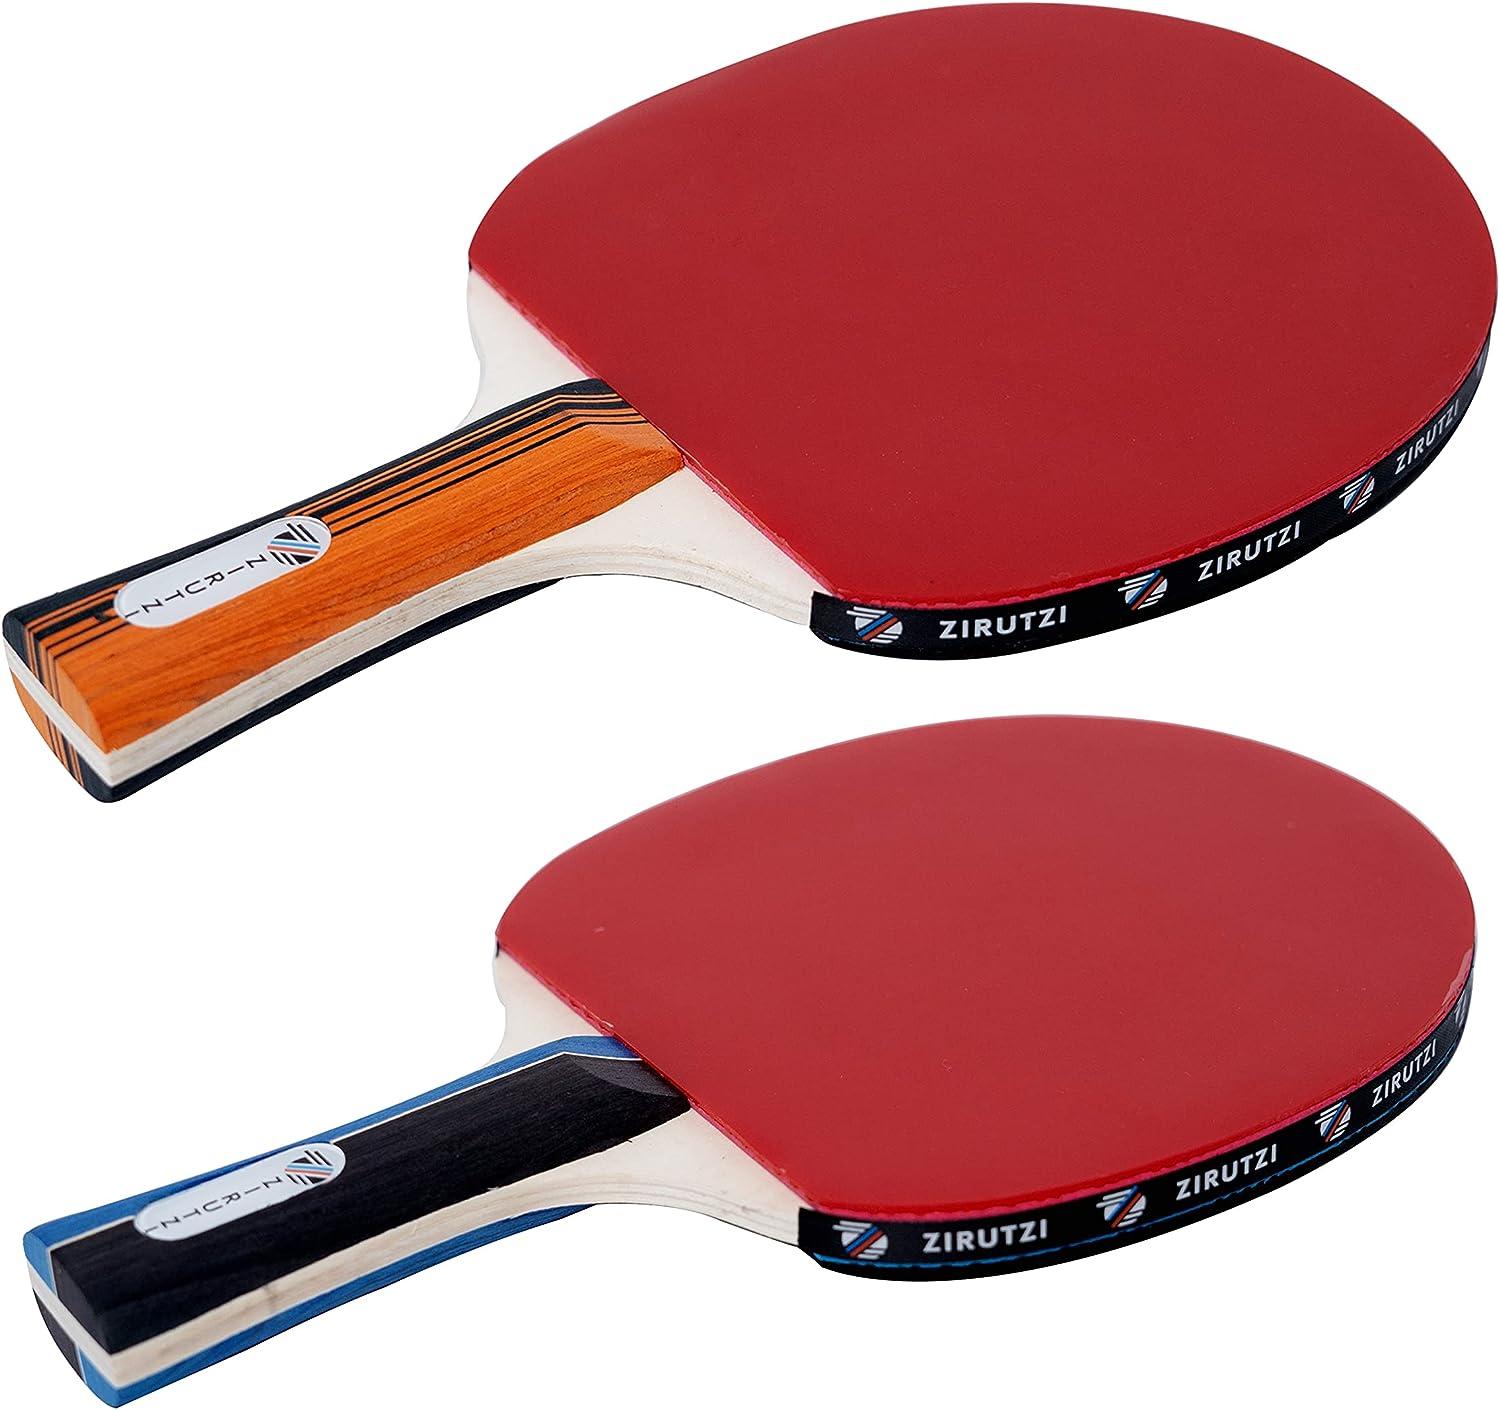 Ozoffer Instant Table Tennis Kit Ping Pong Set Retractable Net +